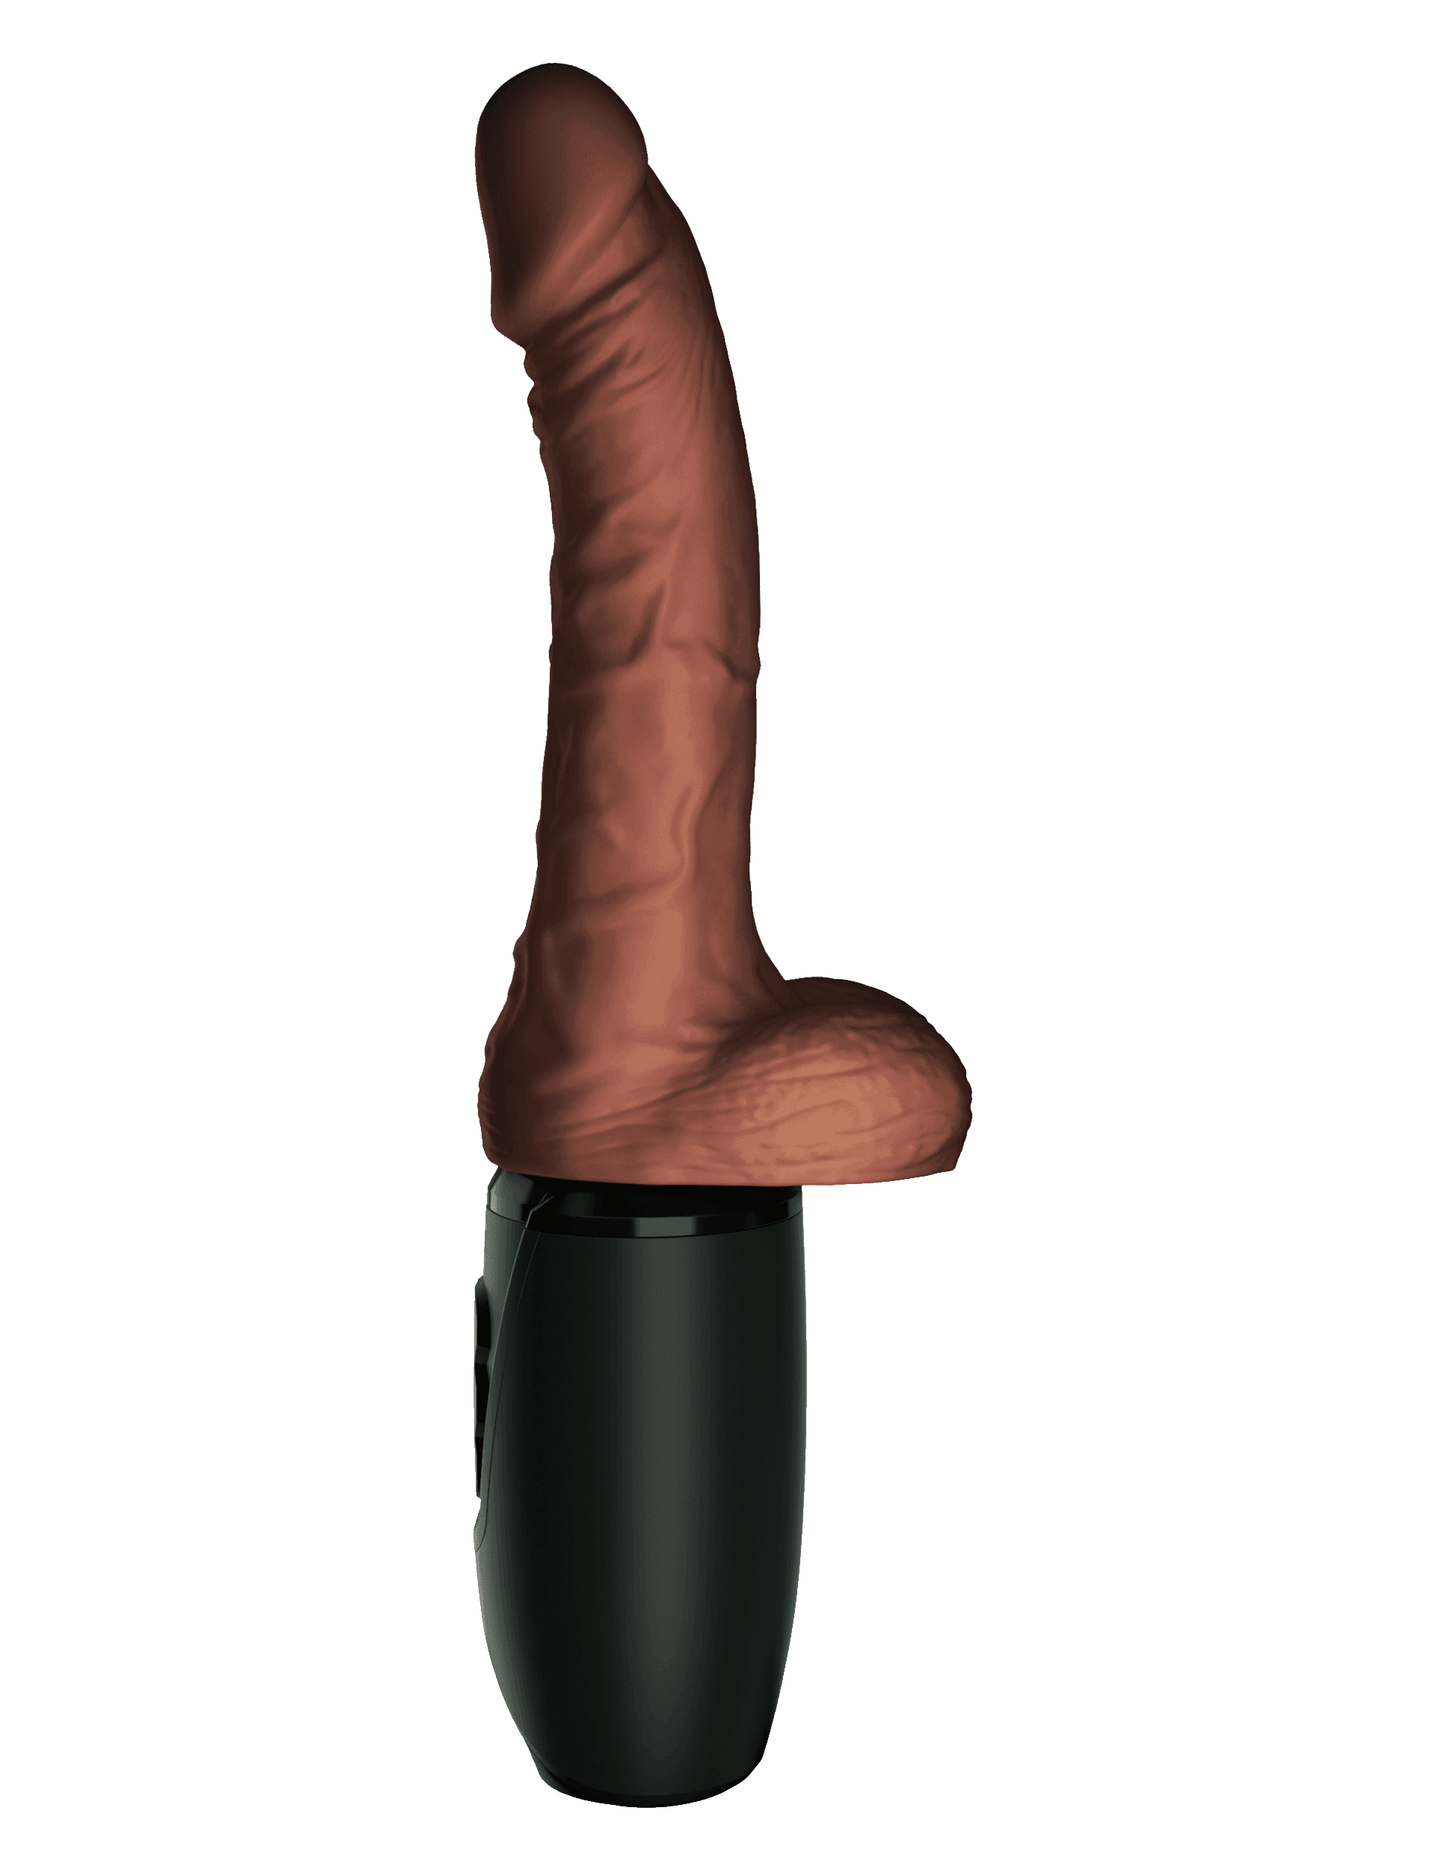 7.5 Inch Thrusting Cock With Balls - Brown - My Sex Toy Hub